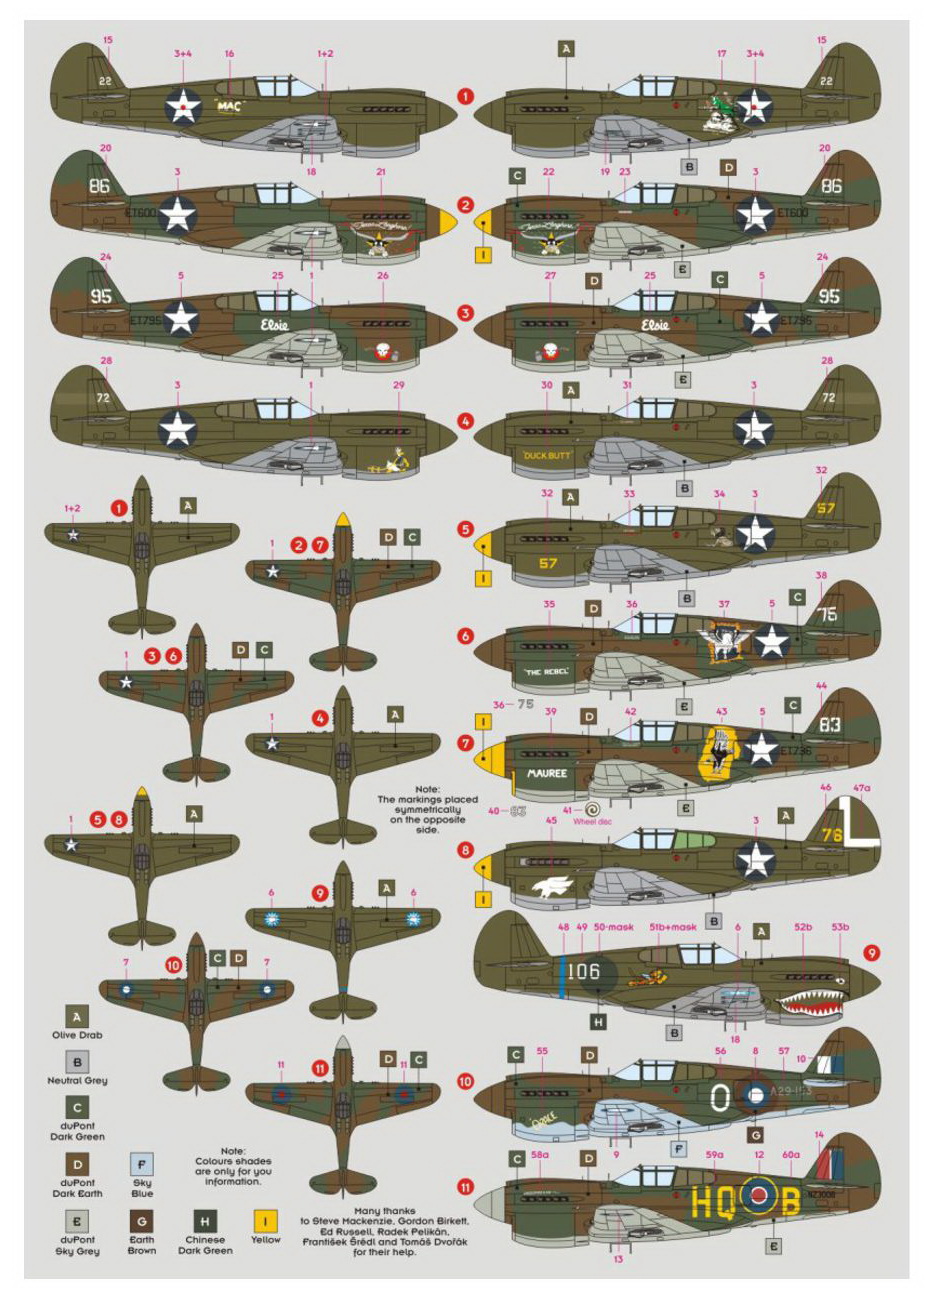 1/48 DK Decals 48022; Curtiss P-40E Warhawk over the Pacific and China